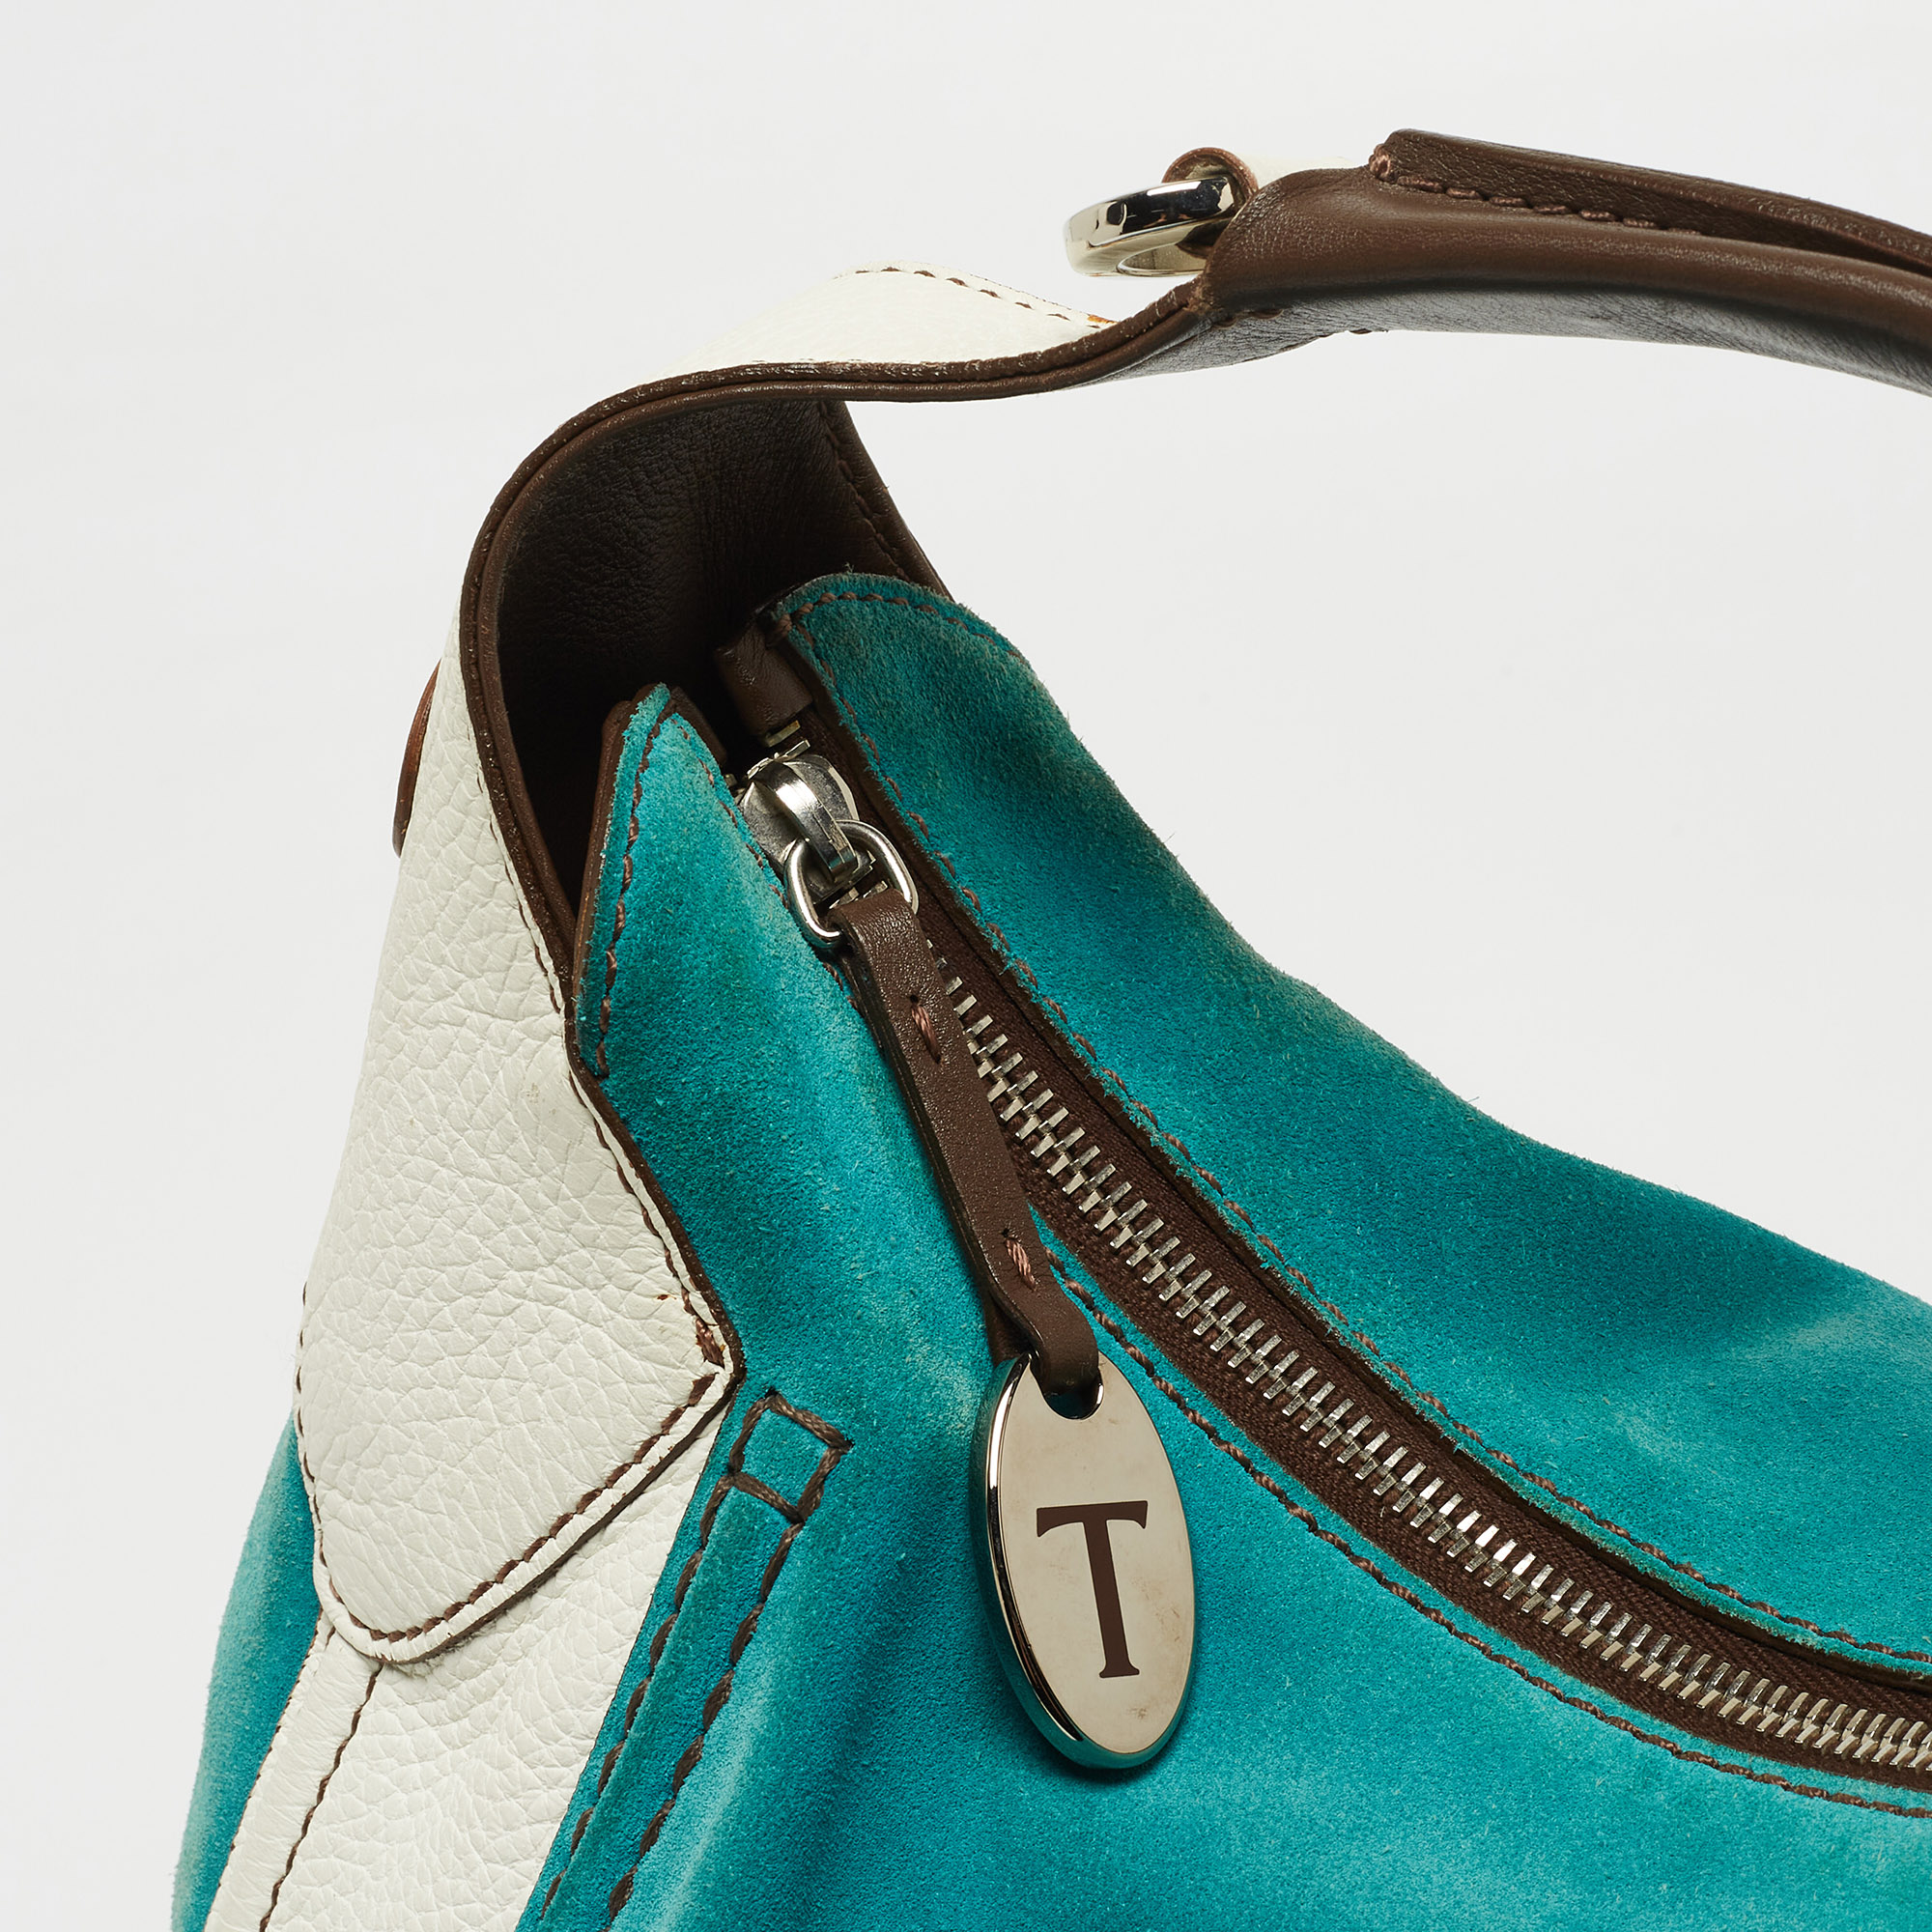 Tod's Teal Blue/White Leather And Suede Hobo